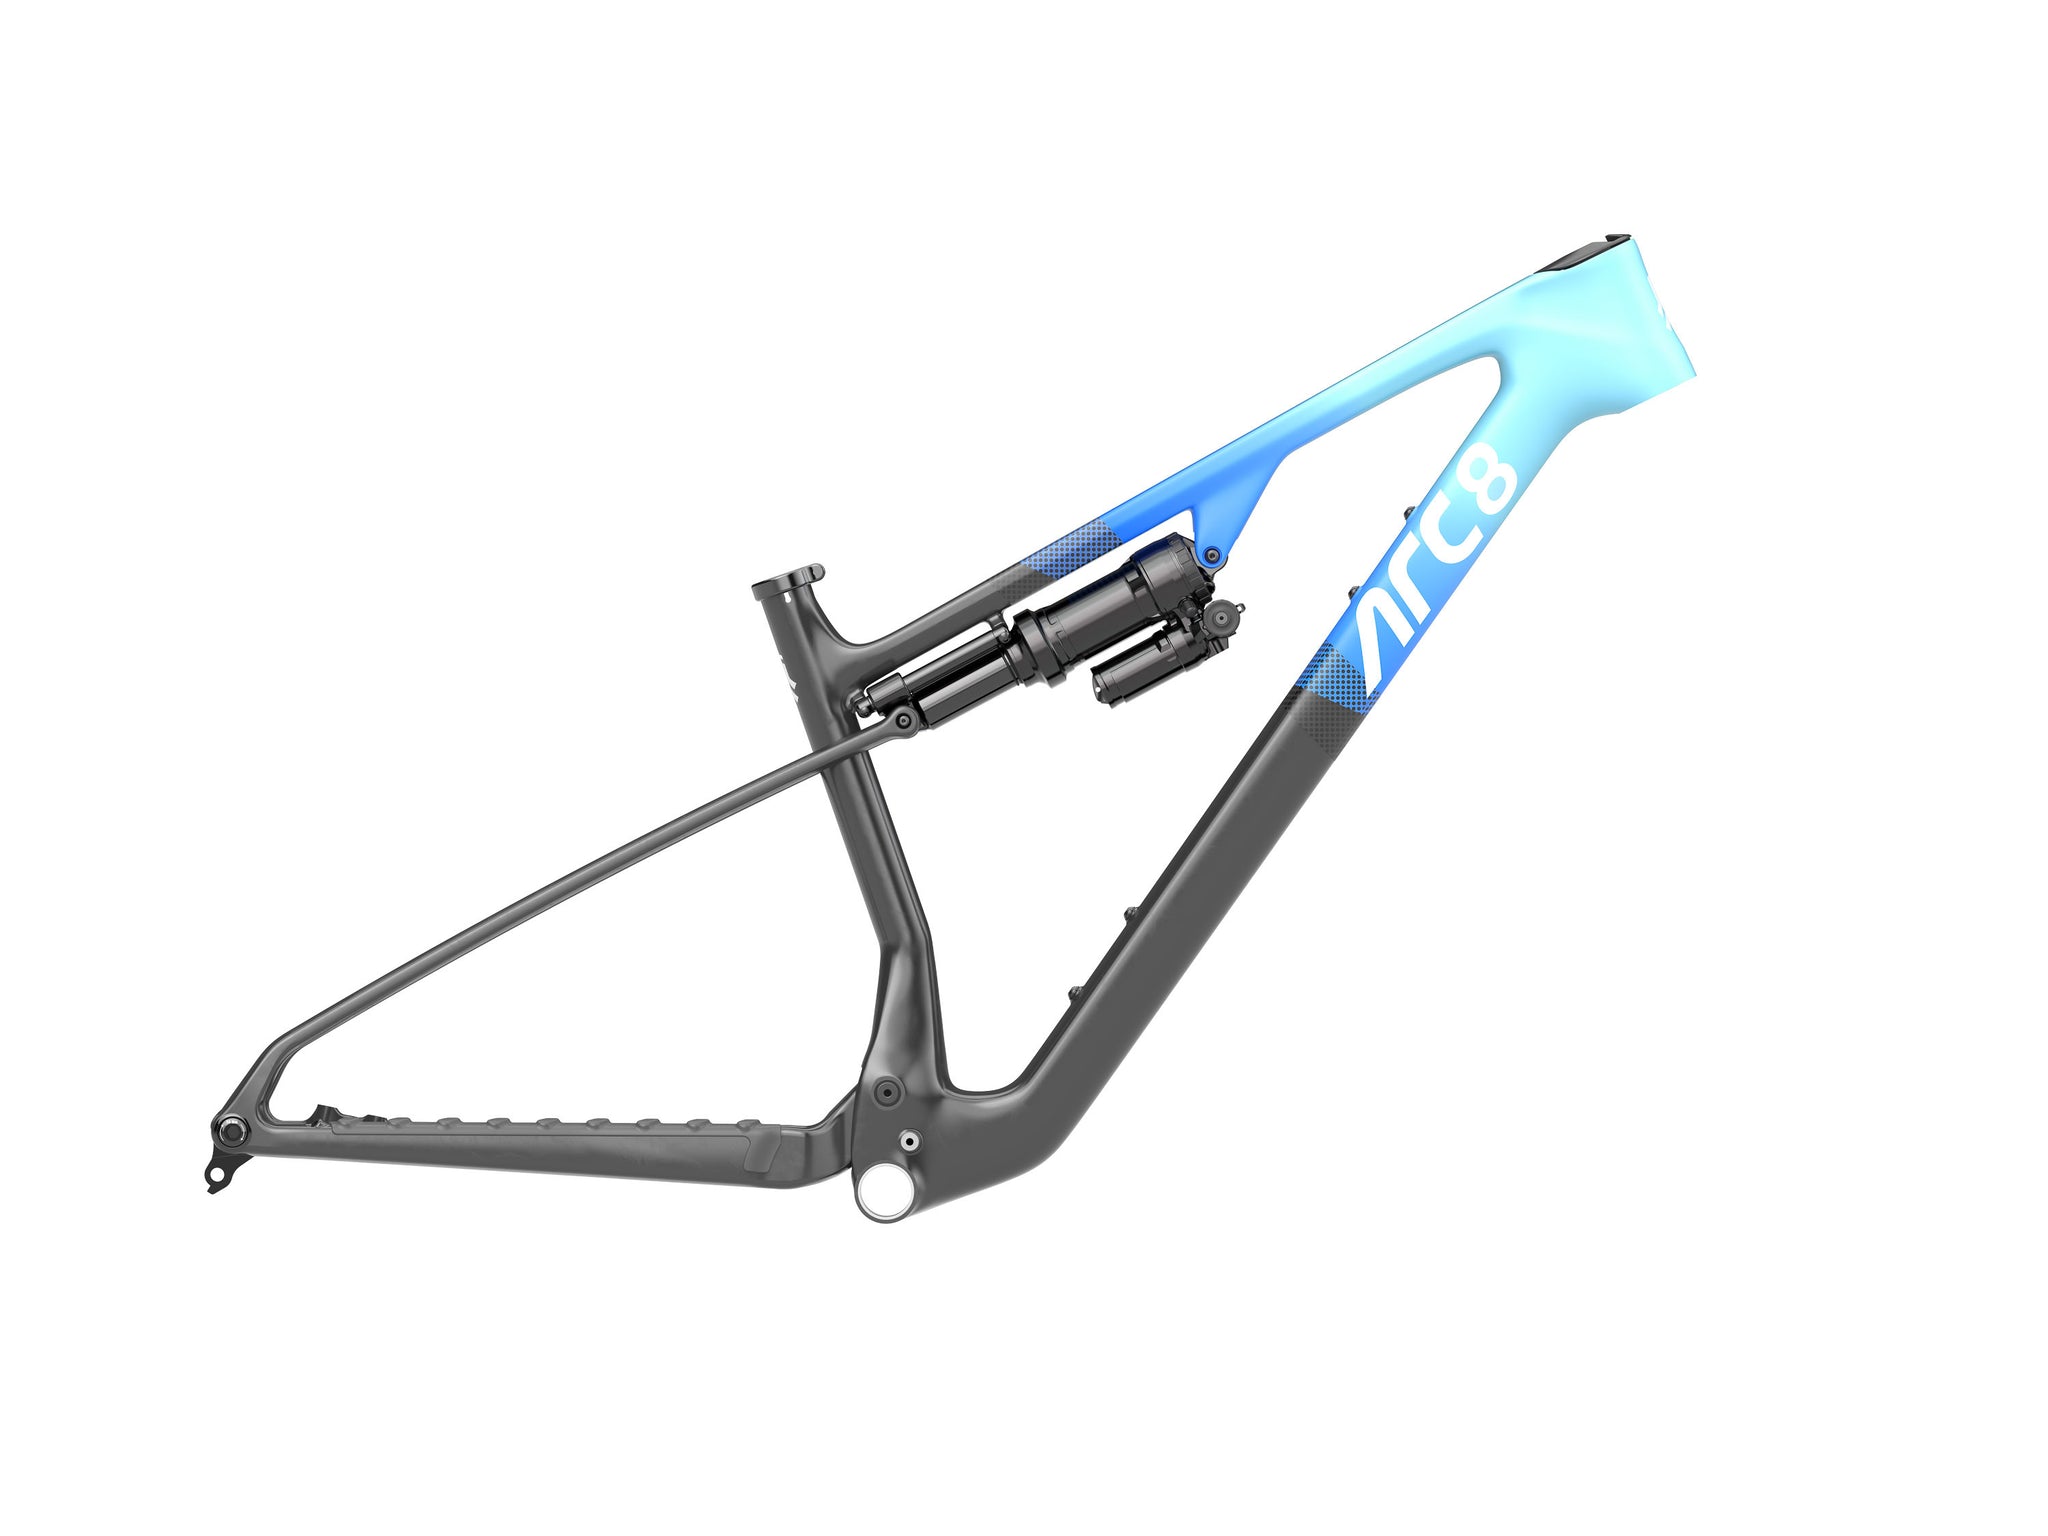 2023 ARC8 Essentiall II Frame including Rockshox Super Deluxe Select+